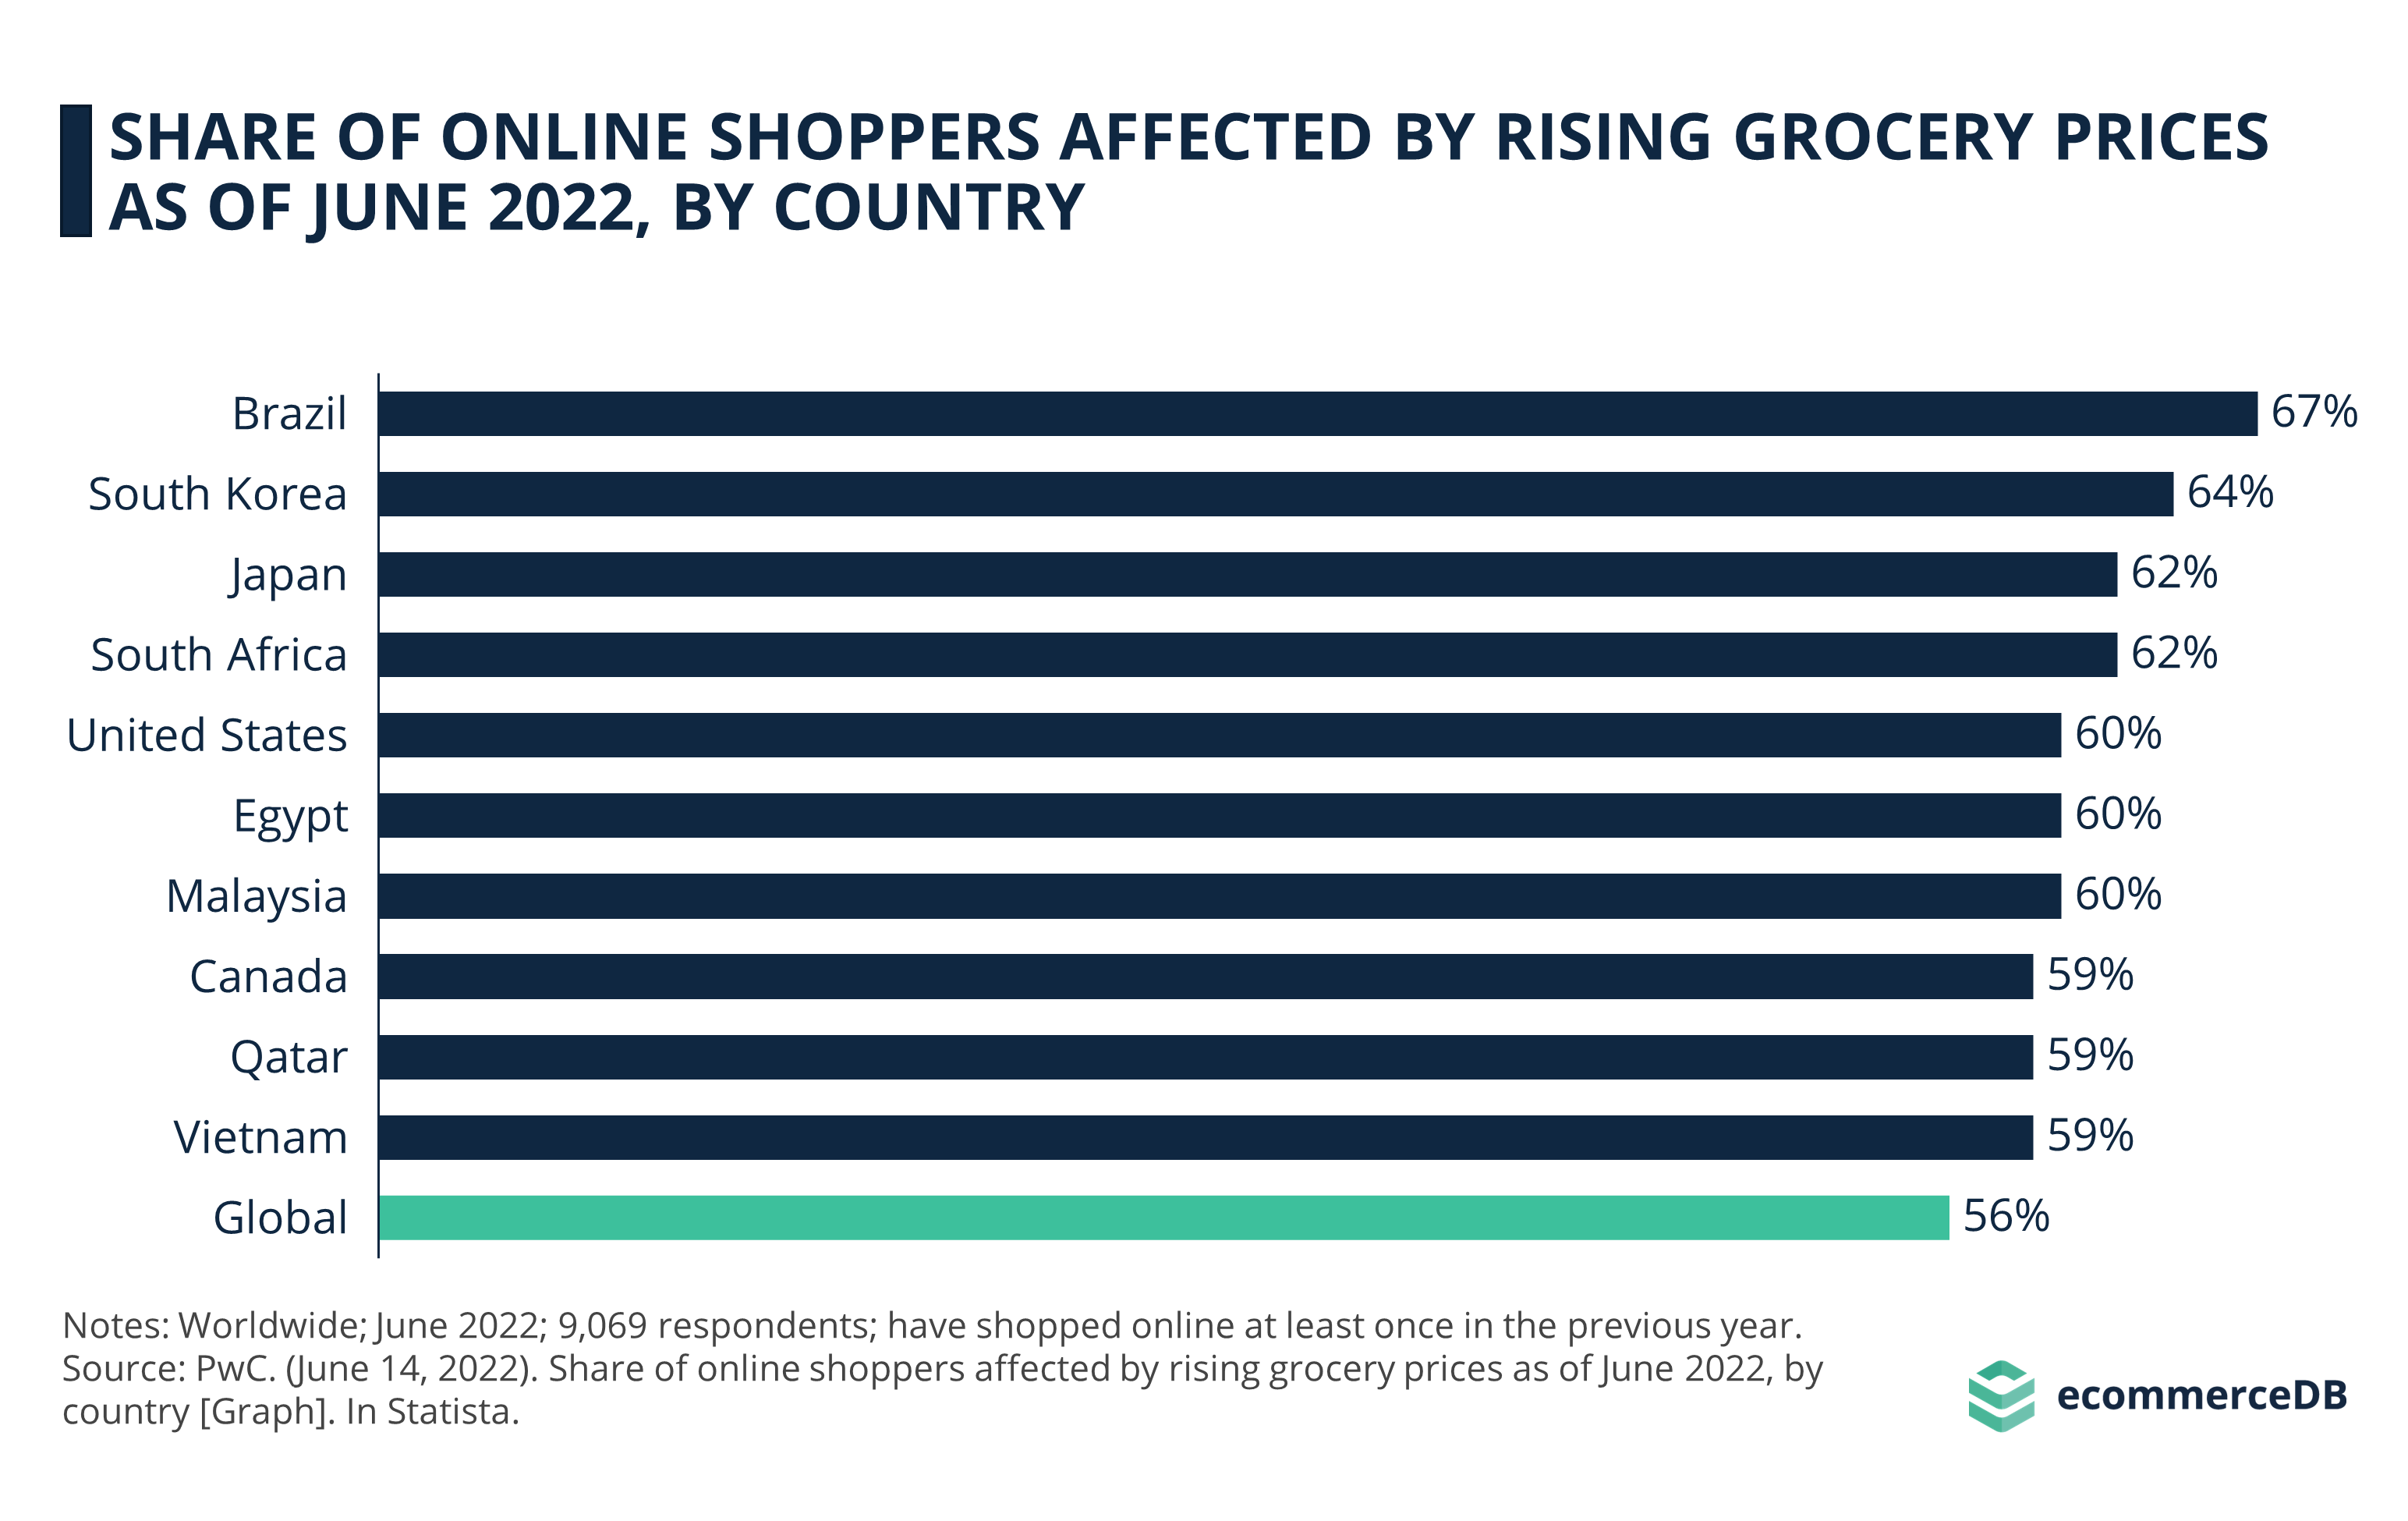 SHARE OF ONLINE SHOPPERS AFFECTED BY RISING GROCERY PRICES AS OF JUNE 2022, BY COUNTRY